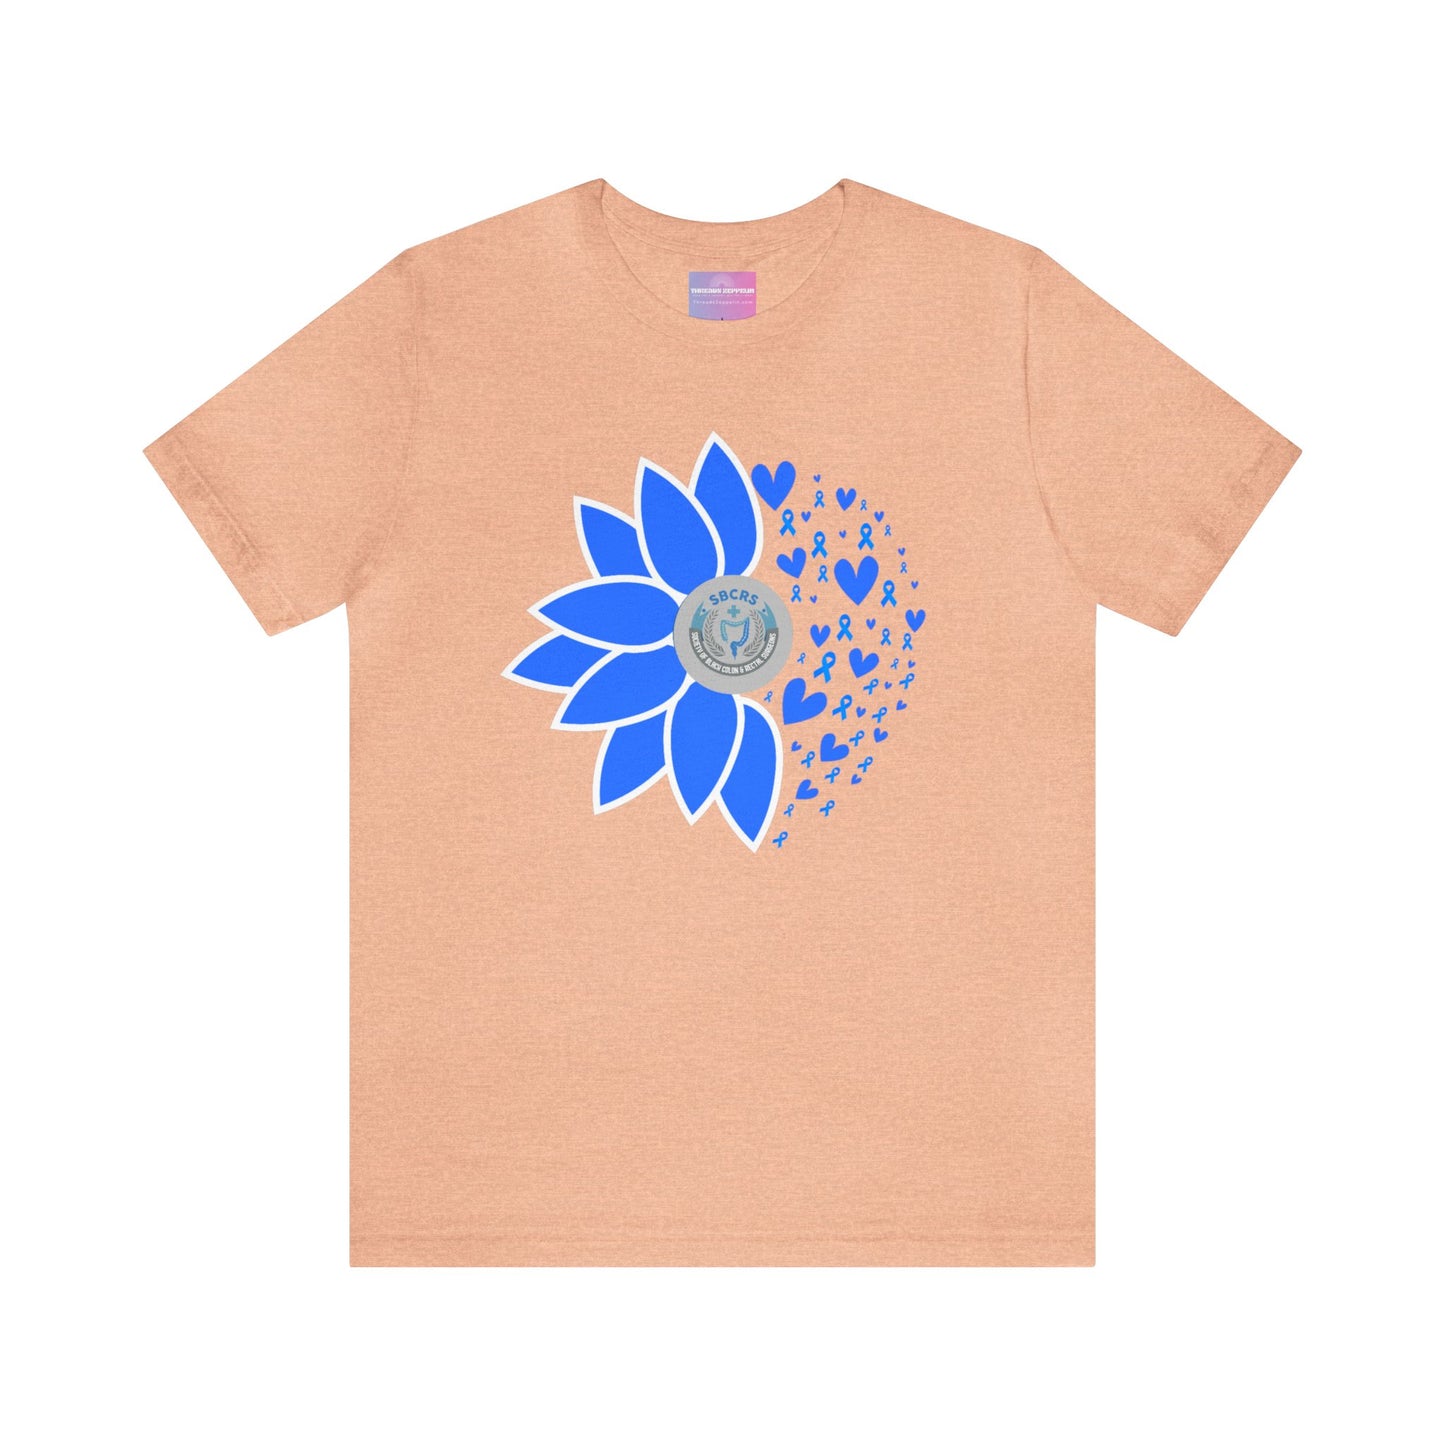 Colorectal Cancer Awareness Sunflower Blue Ribbon Tshirt with SBCRS logo